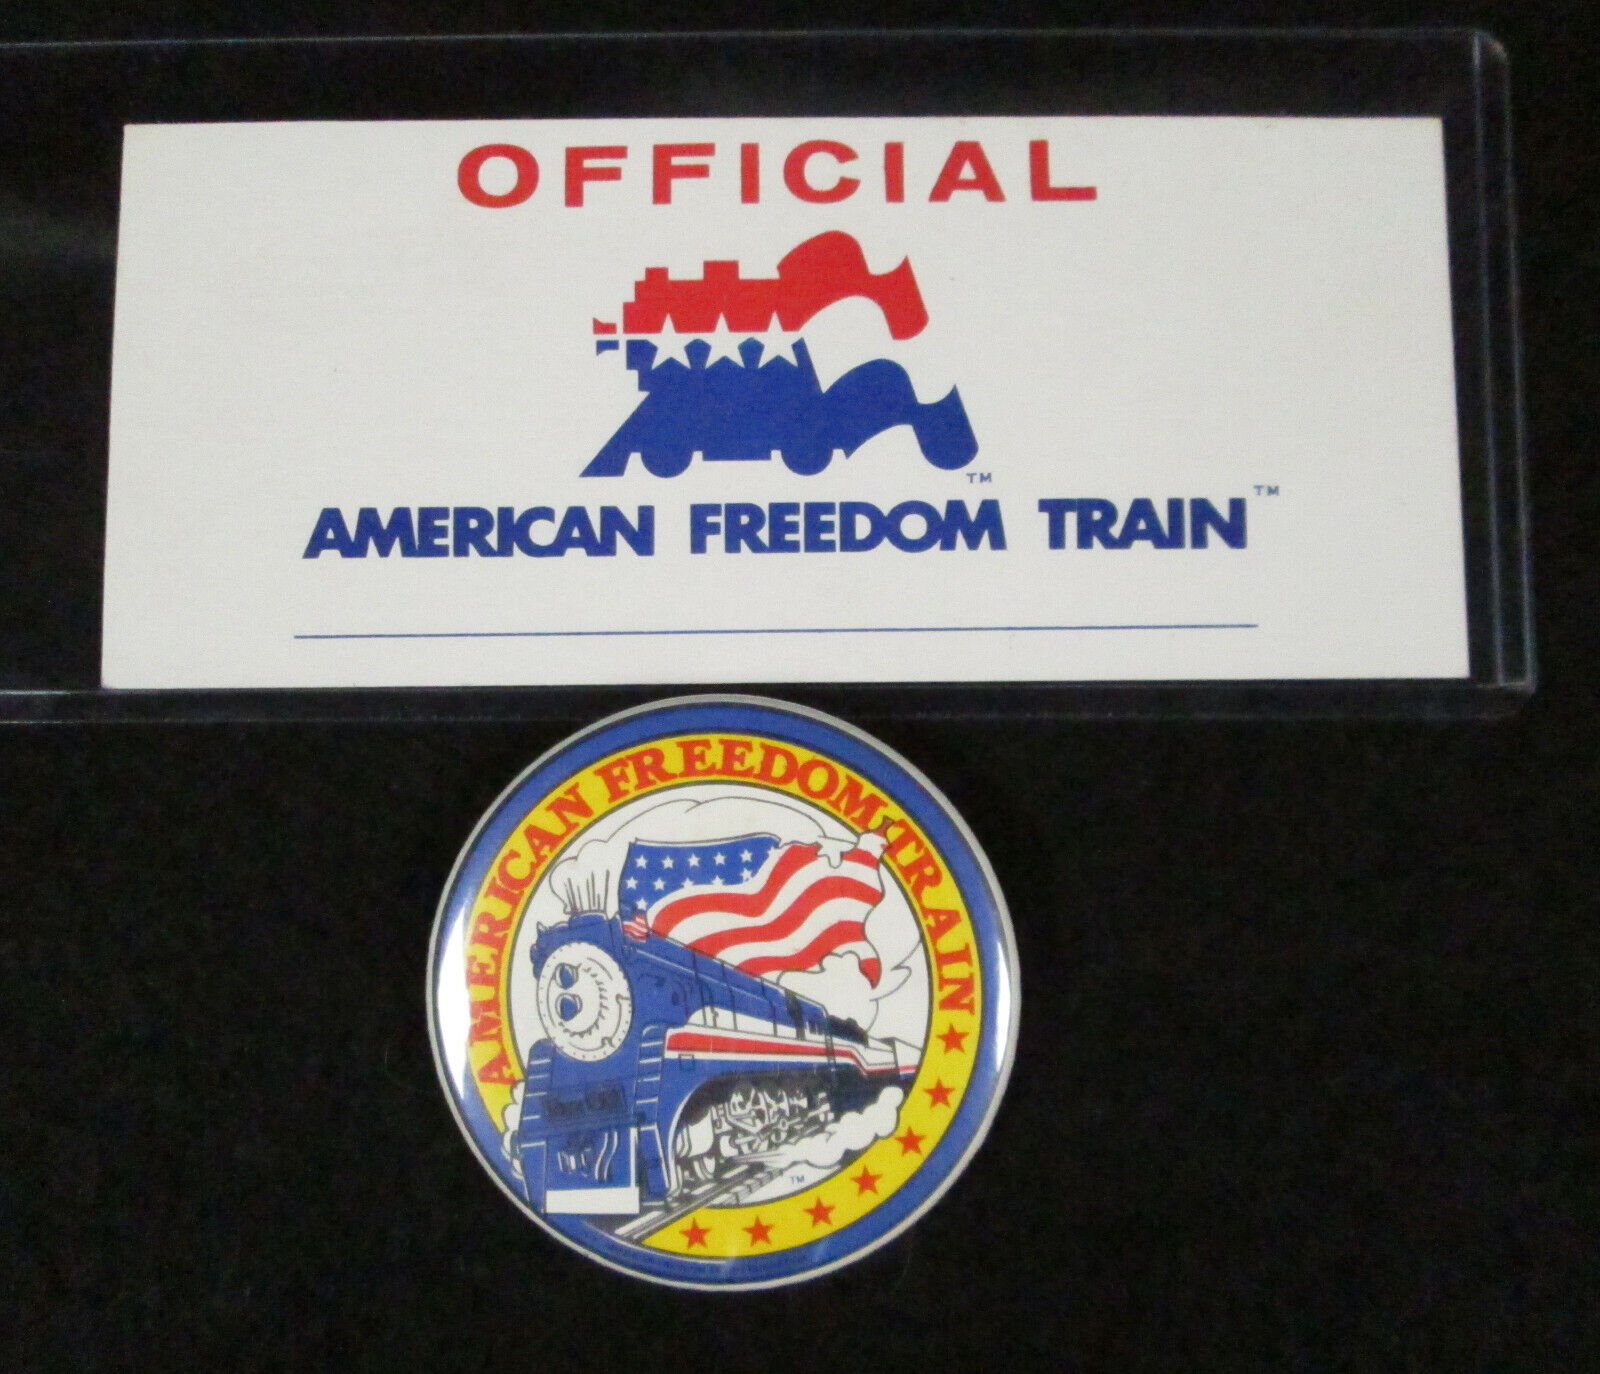 1976 Bicentennial American Freedom Train Button & Ticket, Rochester NY, Stop #9 Без бренда